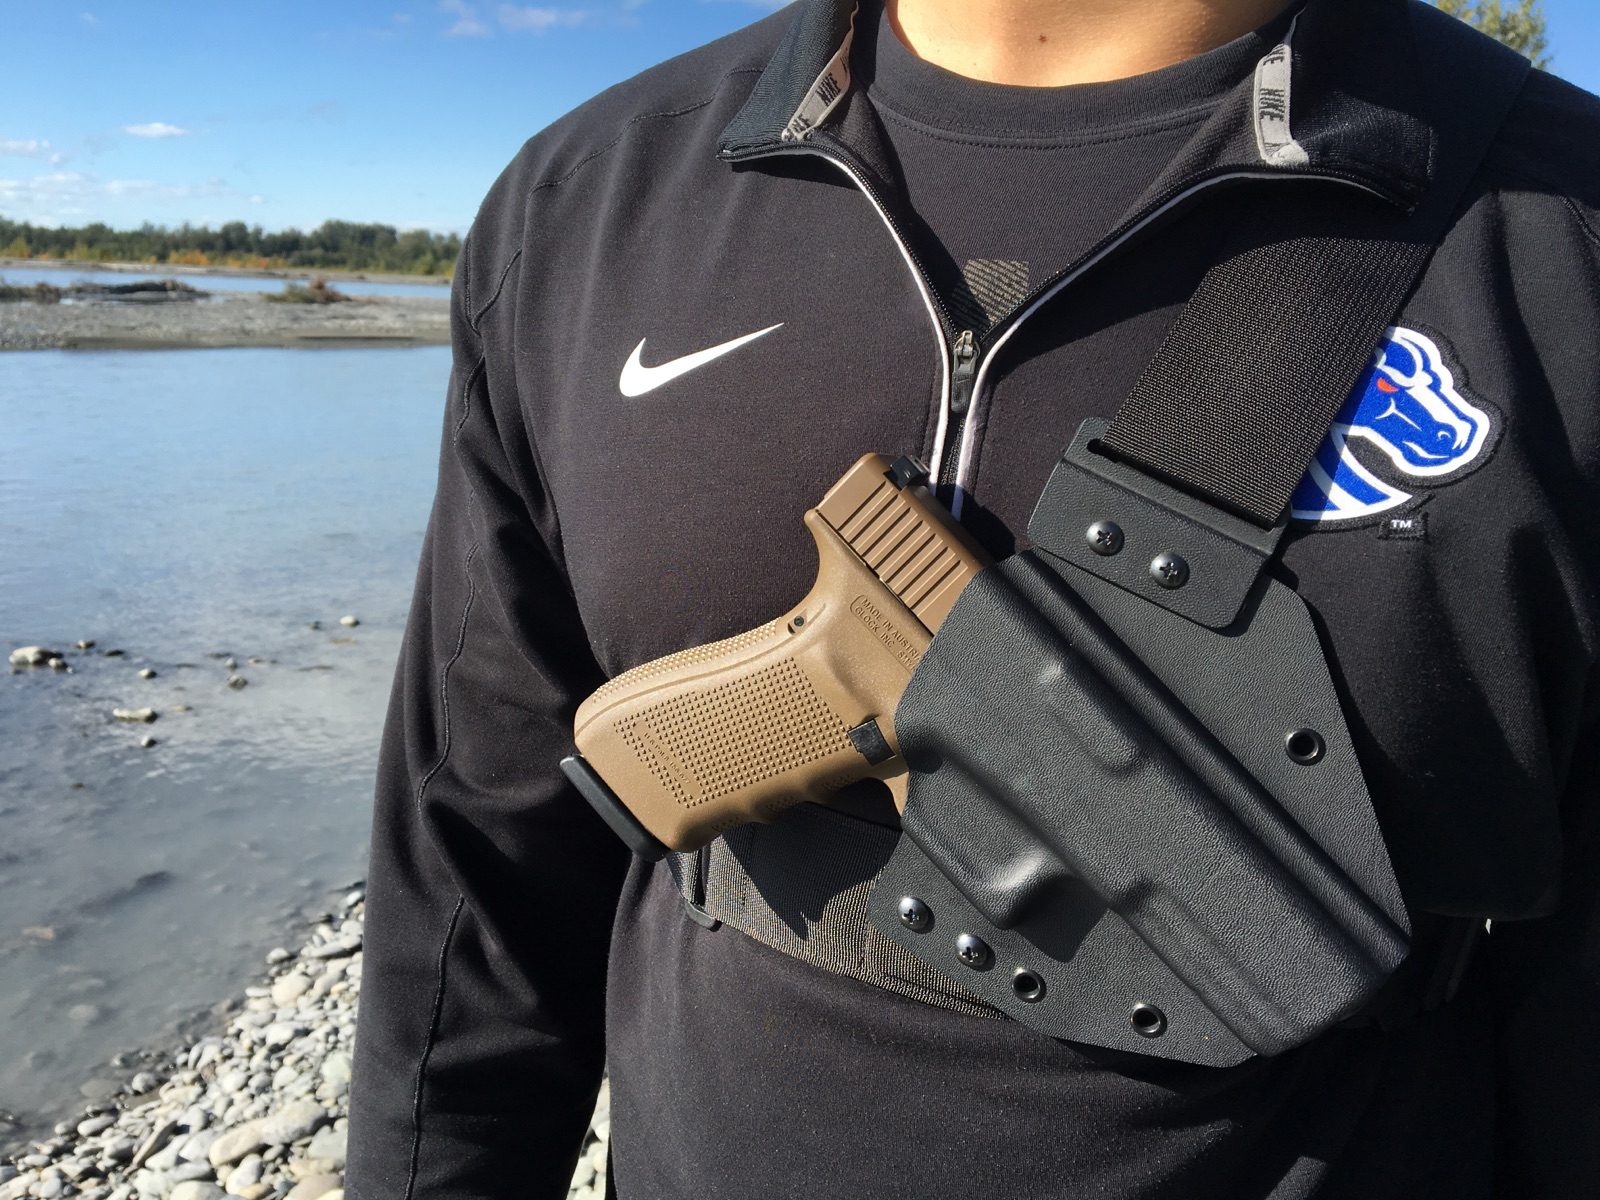 QLH Chest Holster - Alaska's number one chest carry system